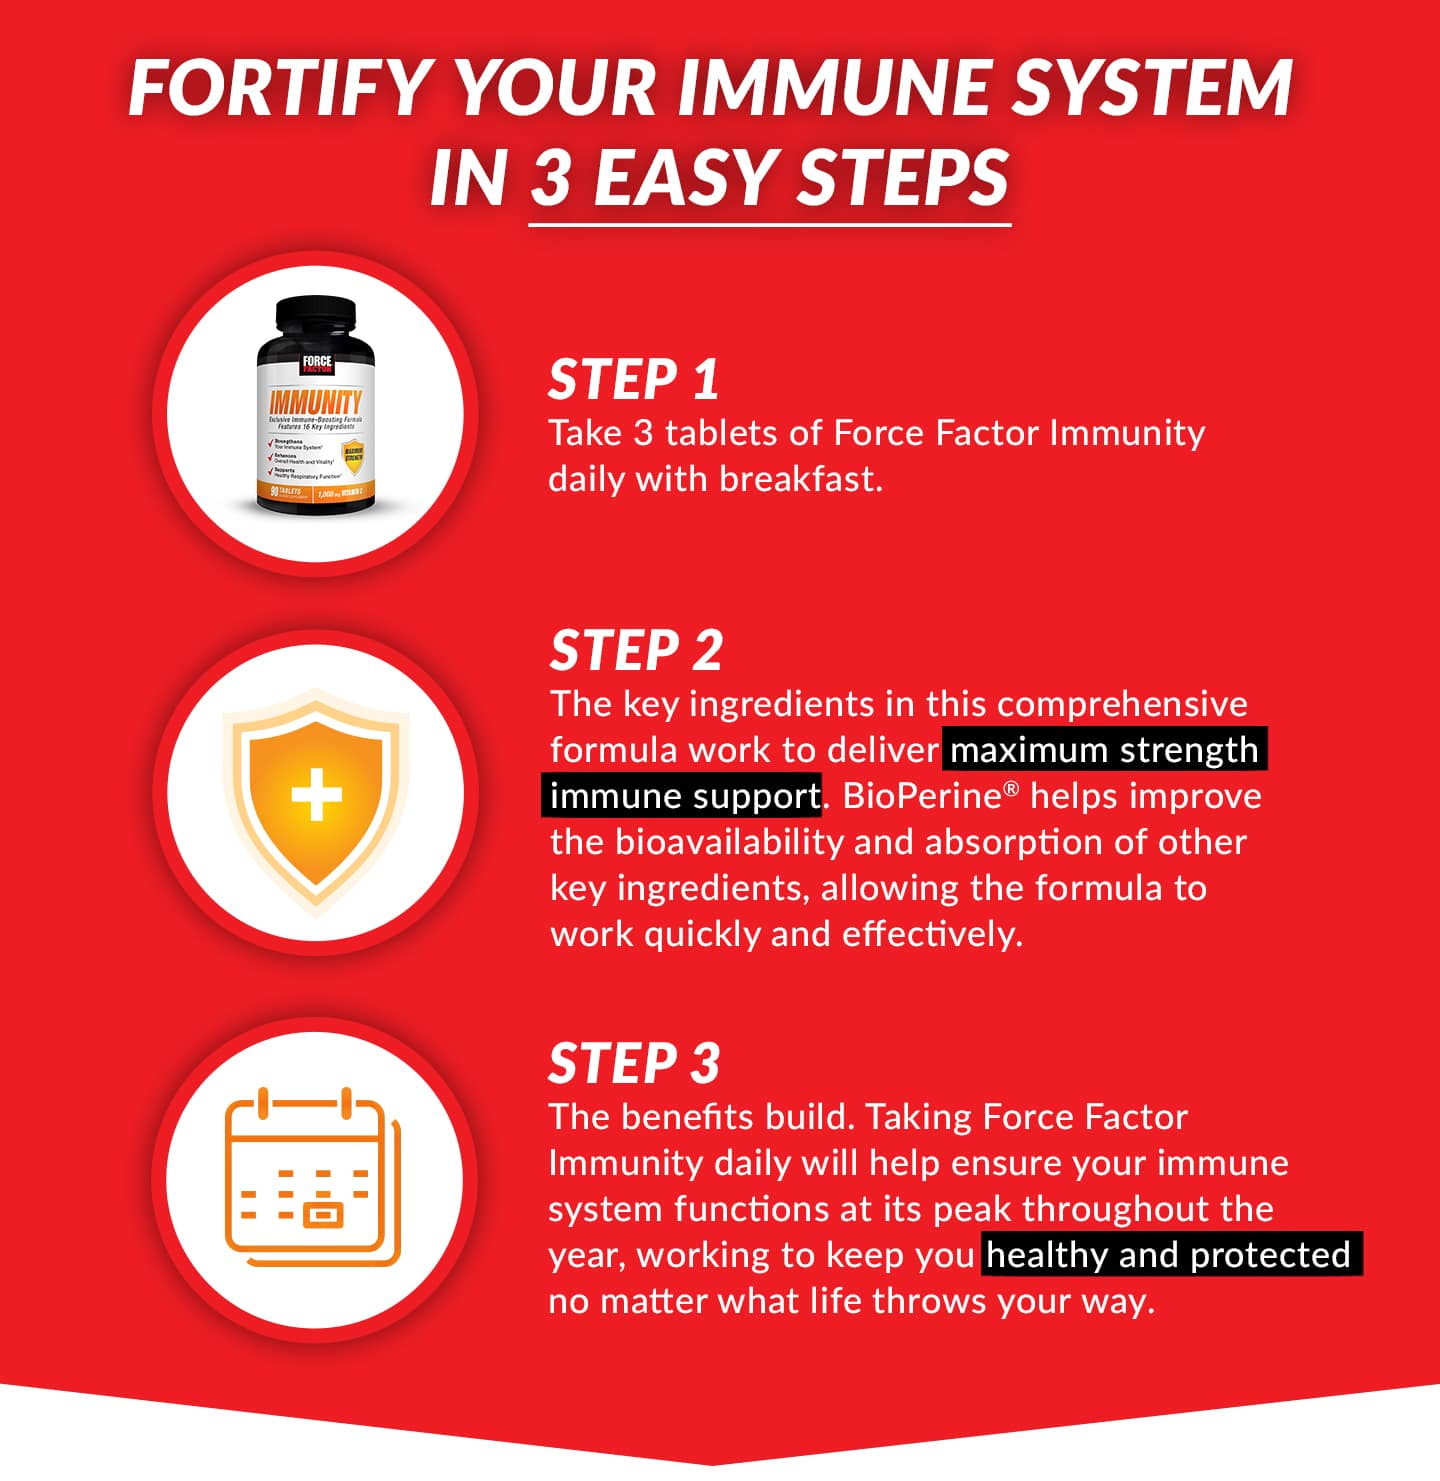 FORTIFY YOUR IMMUNE SYSTEM IN 3 EASY STEPS. STEP 1 - Take 3 tablets of Force Factor Immunity daily with breakfast. STEP 2 - The key ingredients in this comprehensive formula work to deliver maximum strength immune support. BioPerine® helps improve the bioavailability and absorption of other key ingredients, allowing the formula work quickly and effectively. STEP 3 - The benefits build. Taking Force Factor Immunity daily will help ensure your immune system functions at its peak throughout the year, working to keep you healthy and protected no matter what life throws your way.